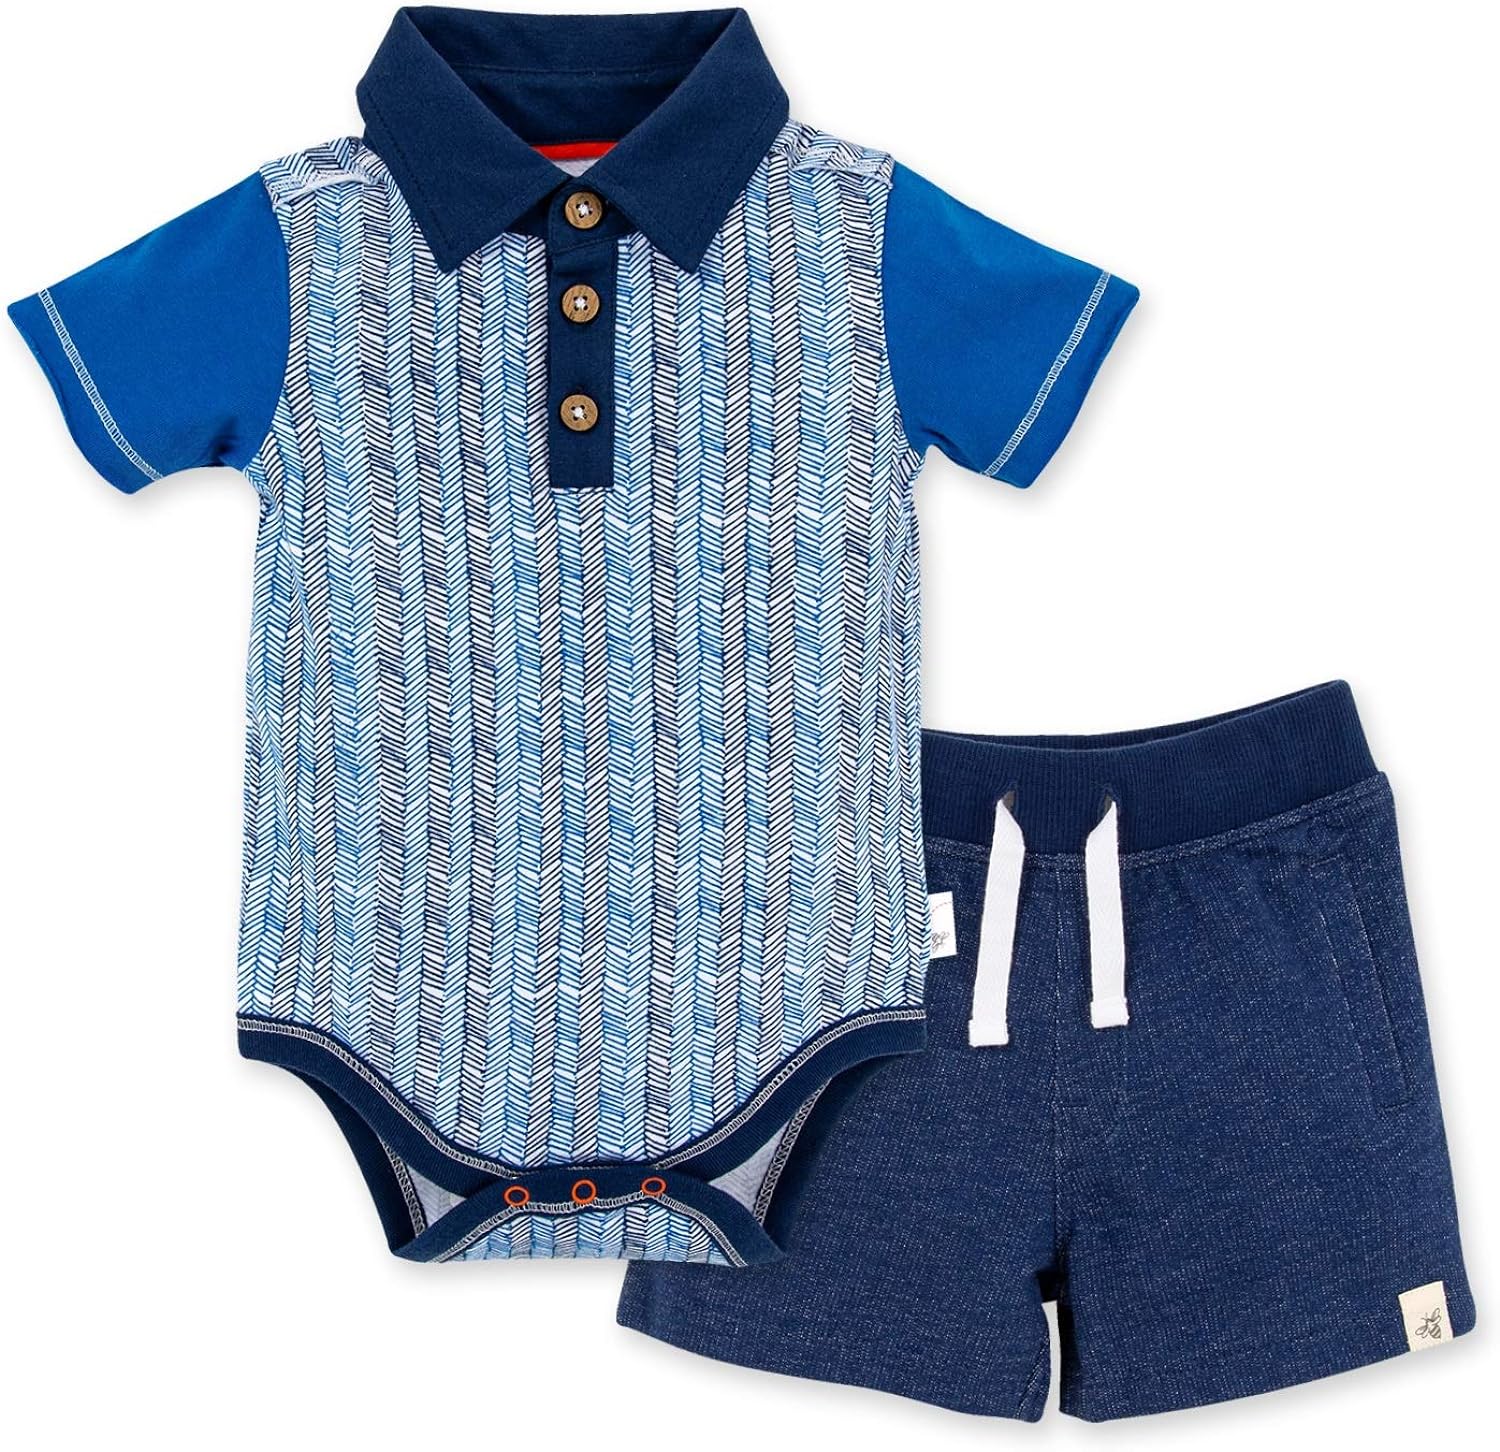 Burt’s Bees Baby Clothing: Naturally Soft and Sustainable Apparel